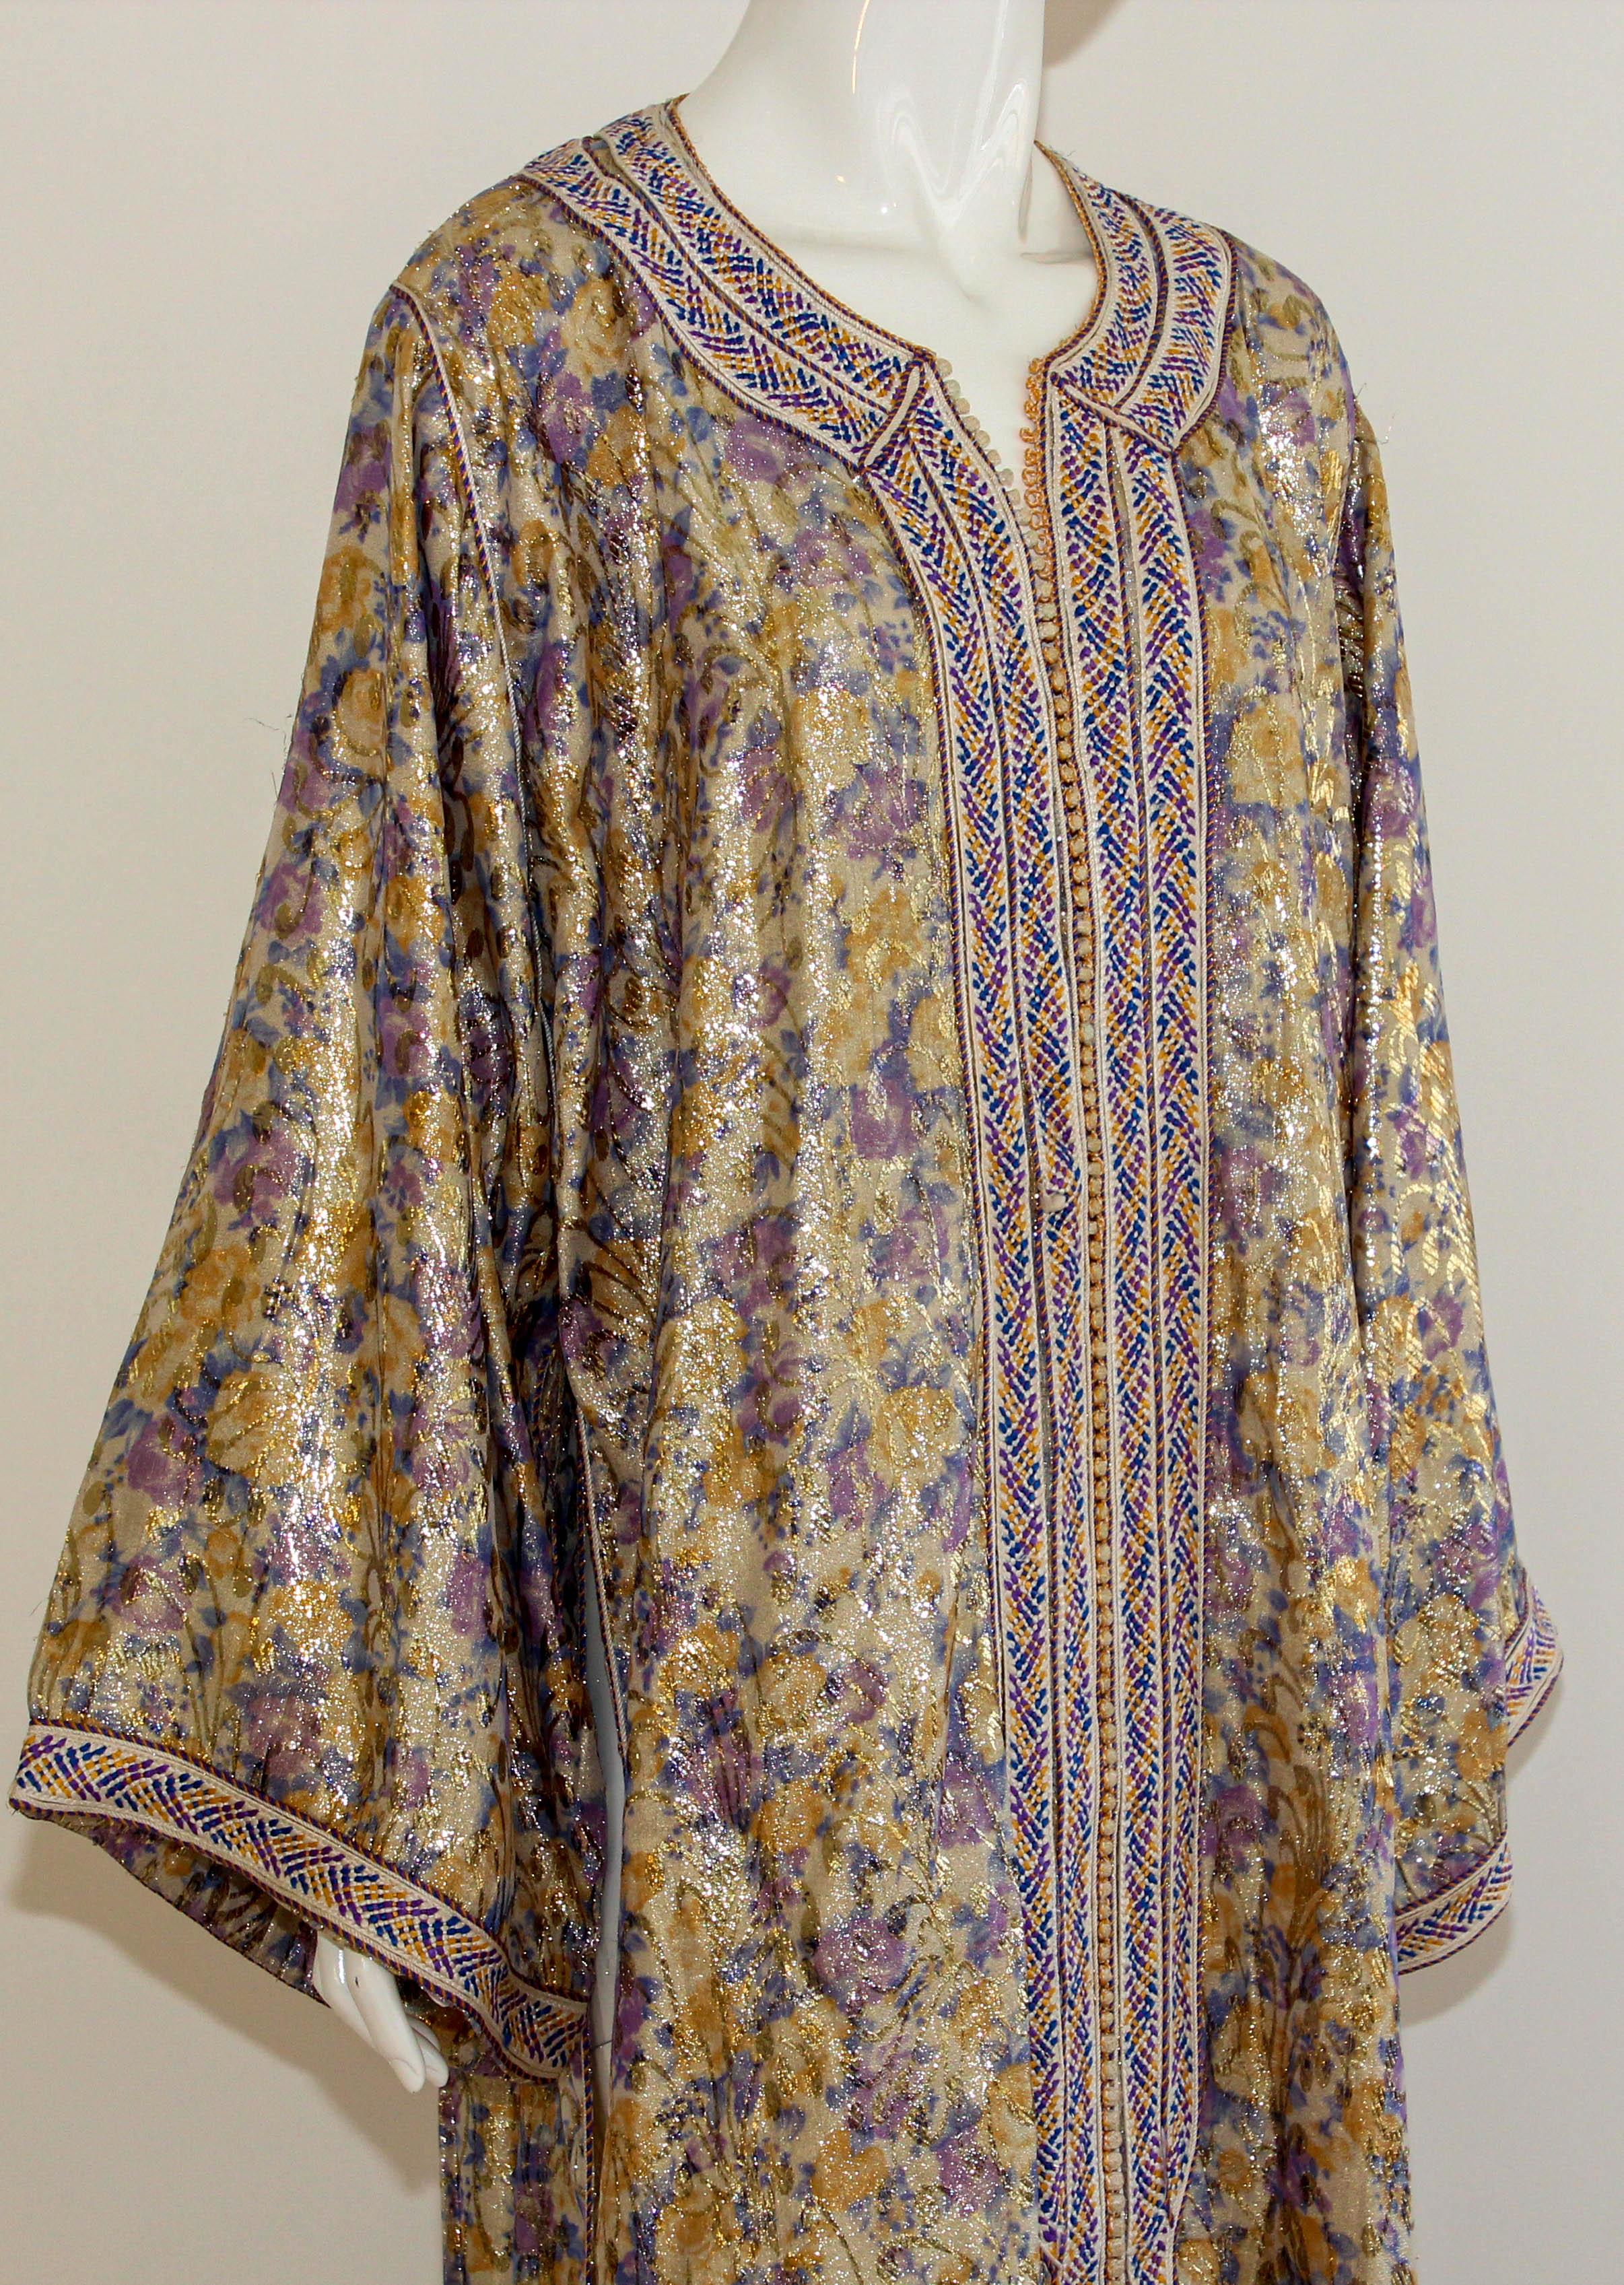 Moroccan Caftan Metallic Floral Silk Brocade Vintage Purple and Gold Kaftan In Good Condition For Sale In North Hollywood, CA